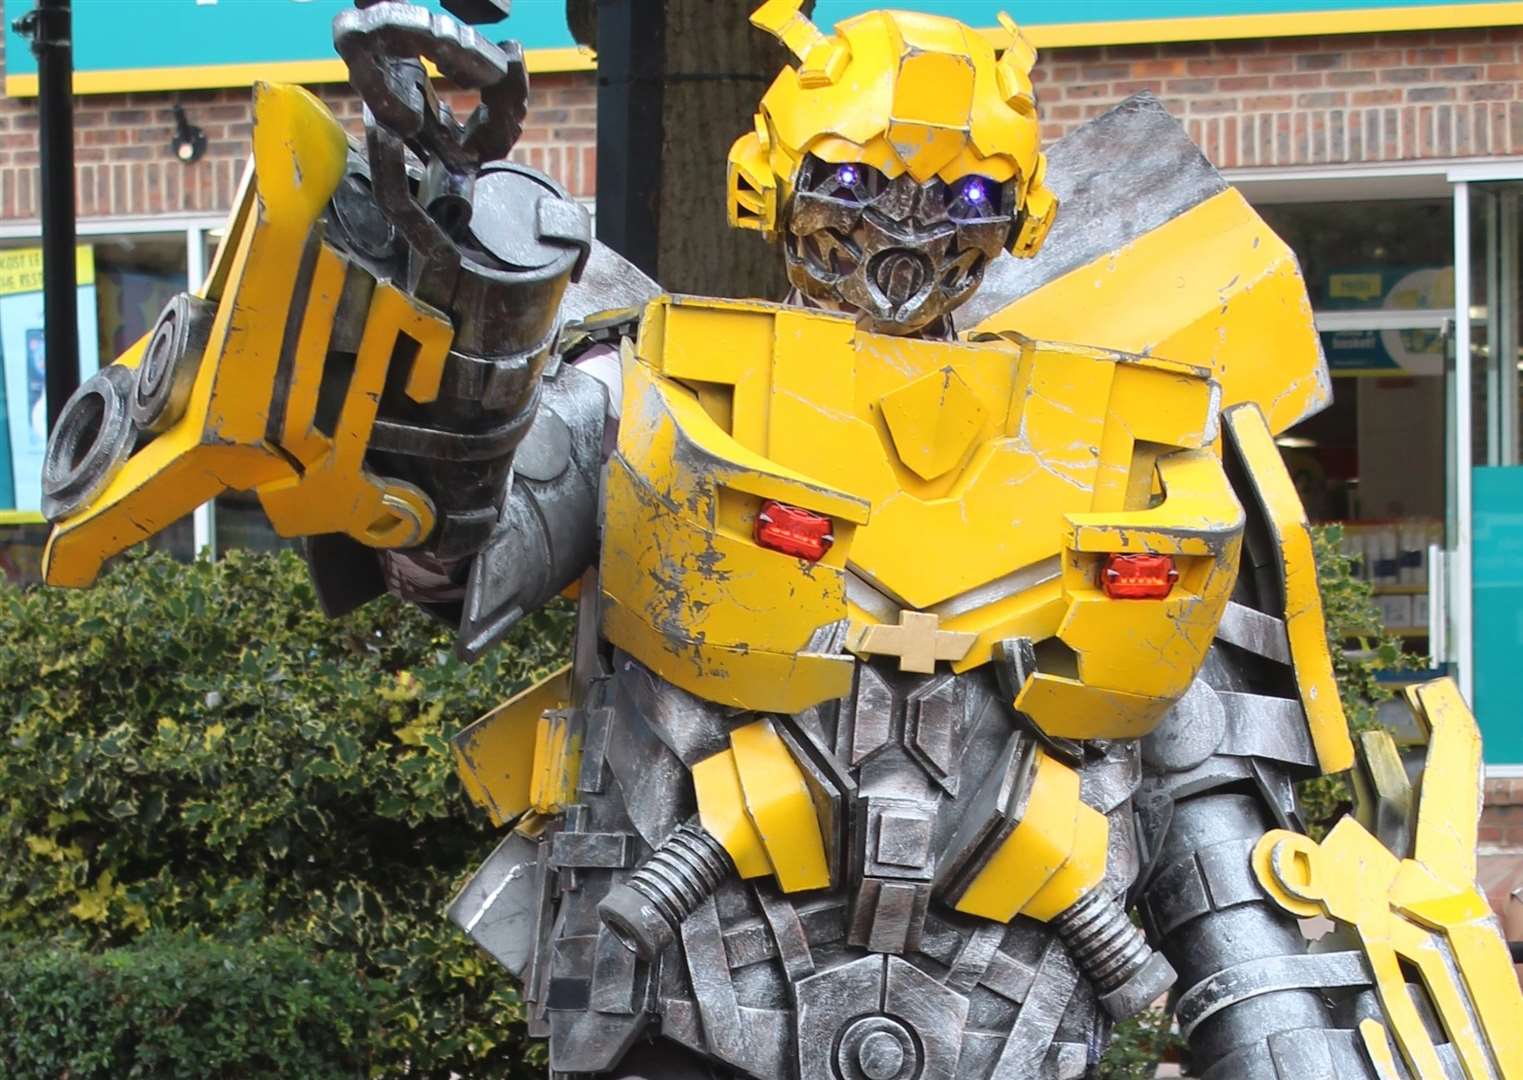 Transformers are coming to Sittingbourne